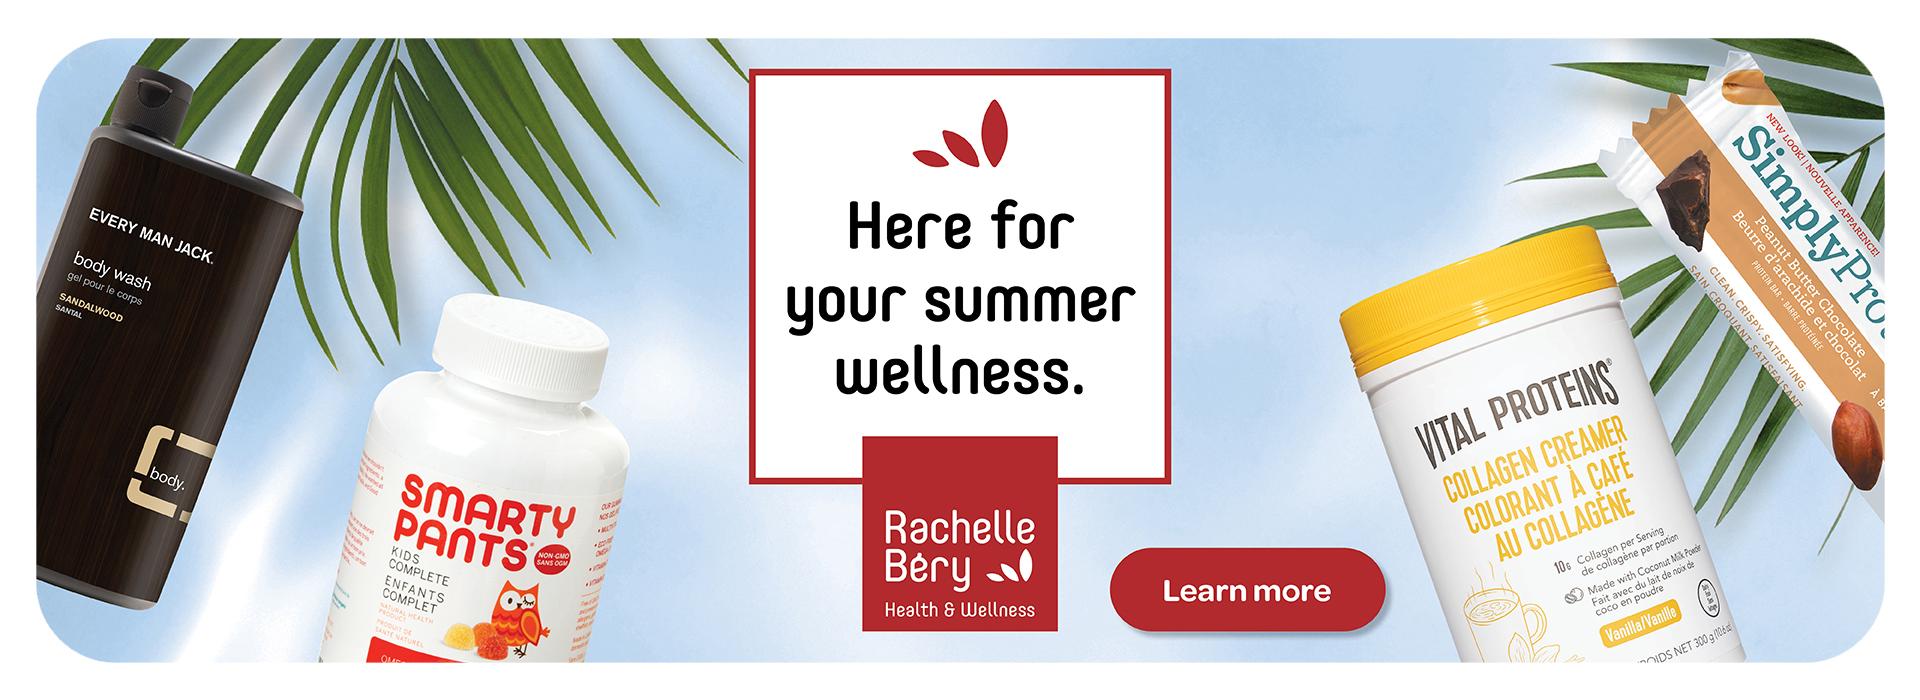 Text Reading 'We are here for your summer wellness. 'Learn more' from the button given below.'